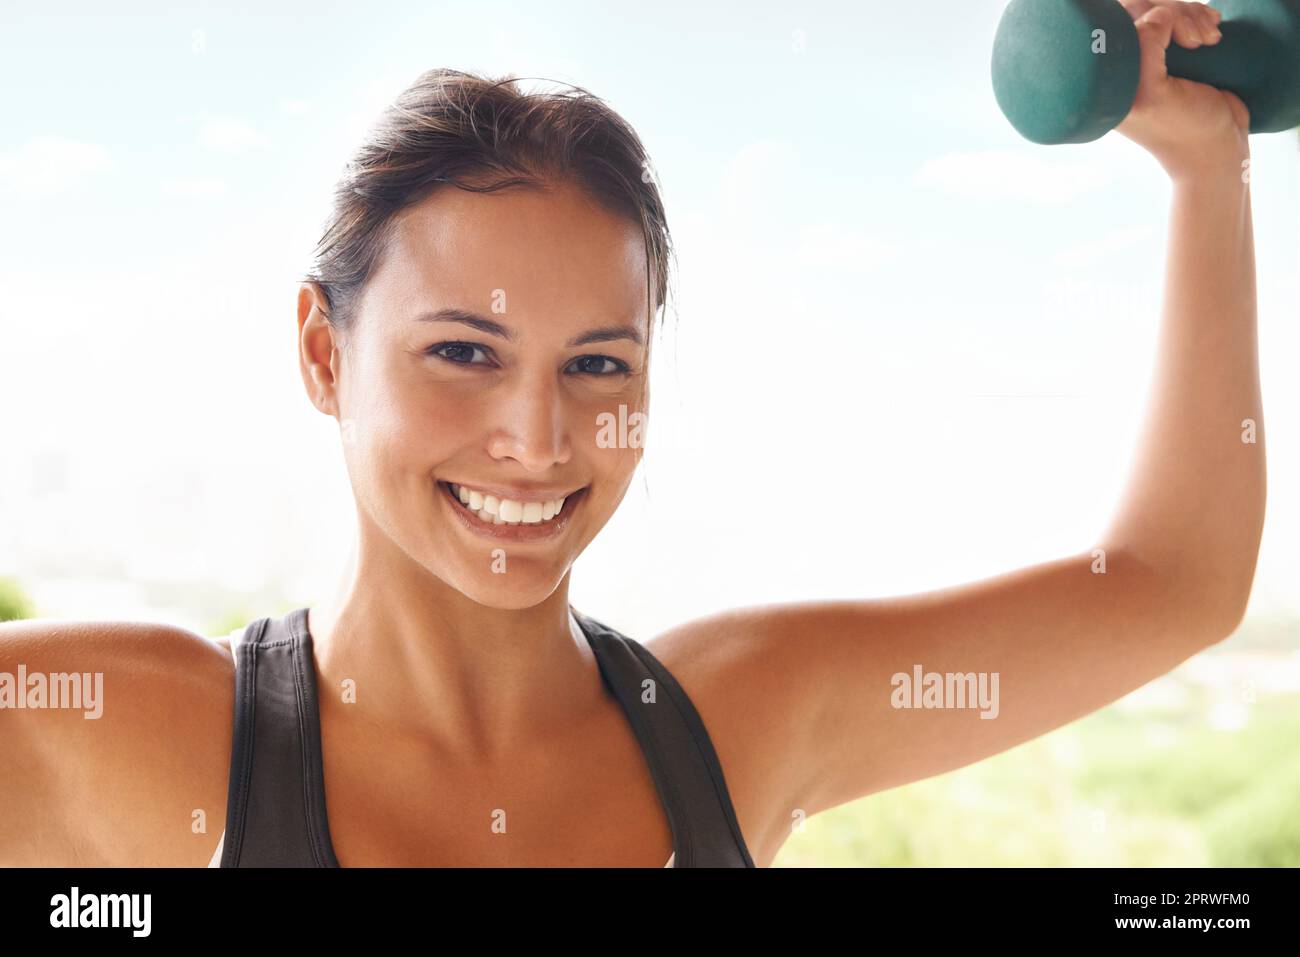 Making her muscles smile. Portrait of a sporty young woman working out with dumbbells. Stock Photo